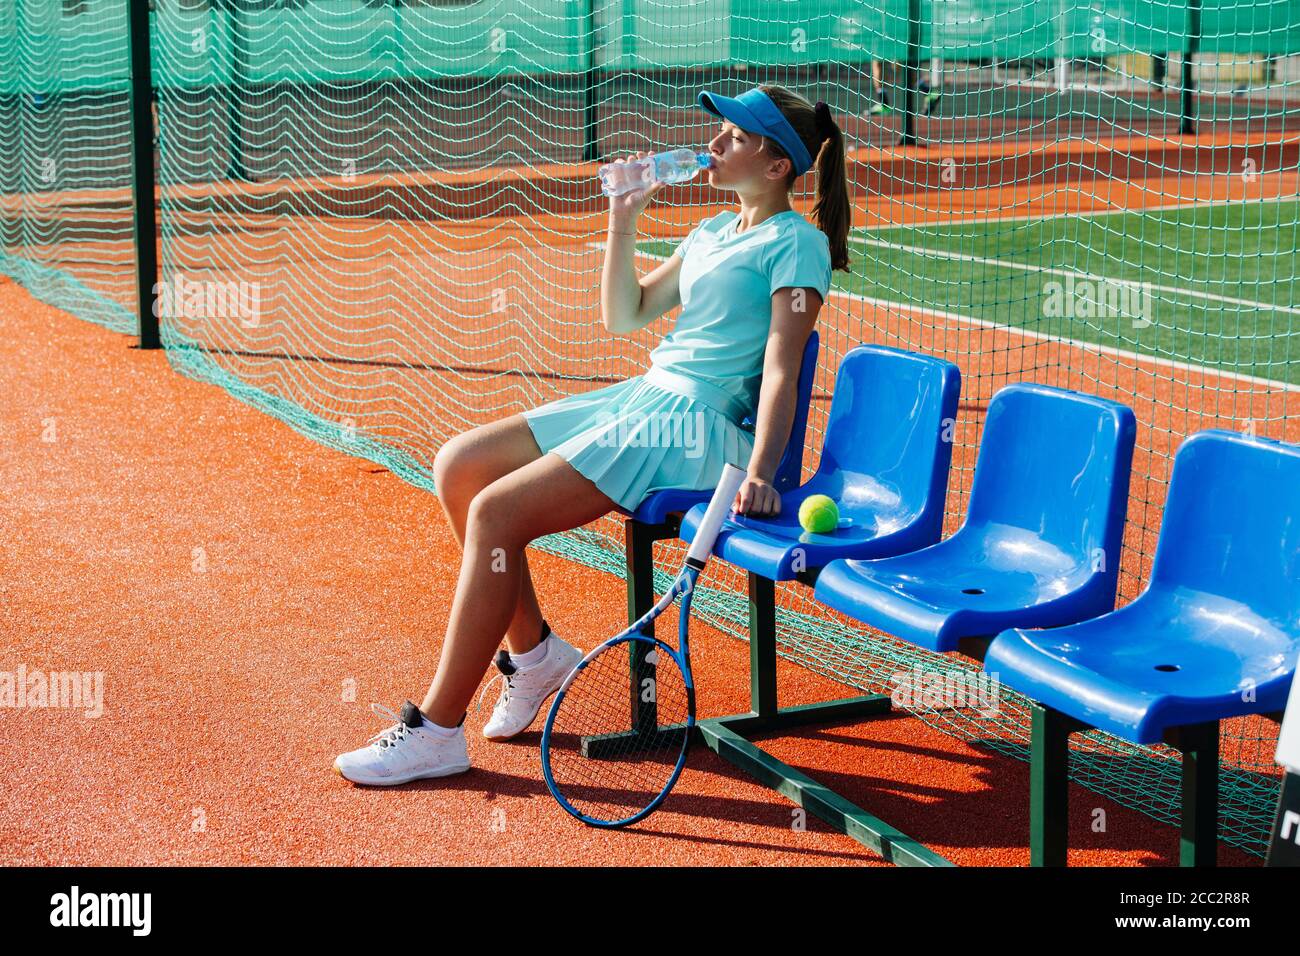 Teenage girl sitting on a chair bench next to tennis court to take a short break Stock Photo